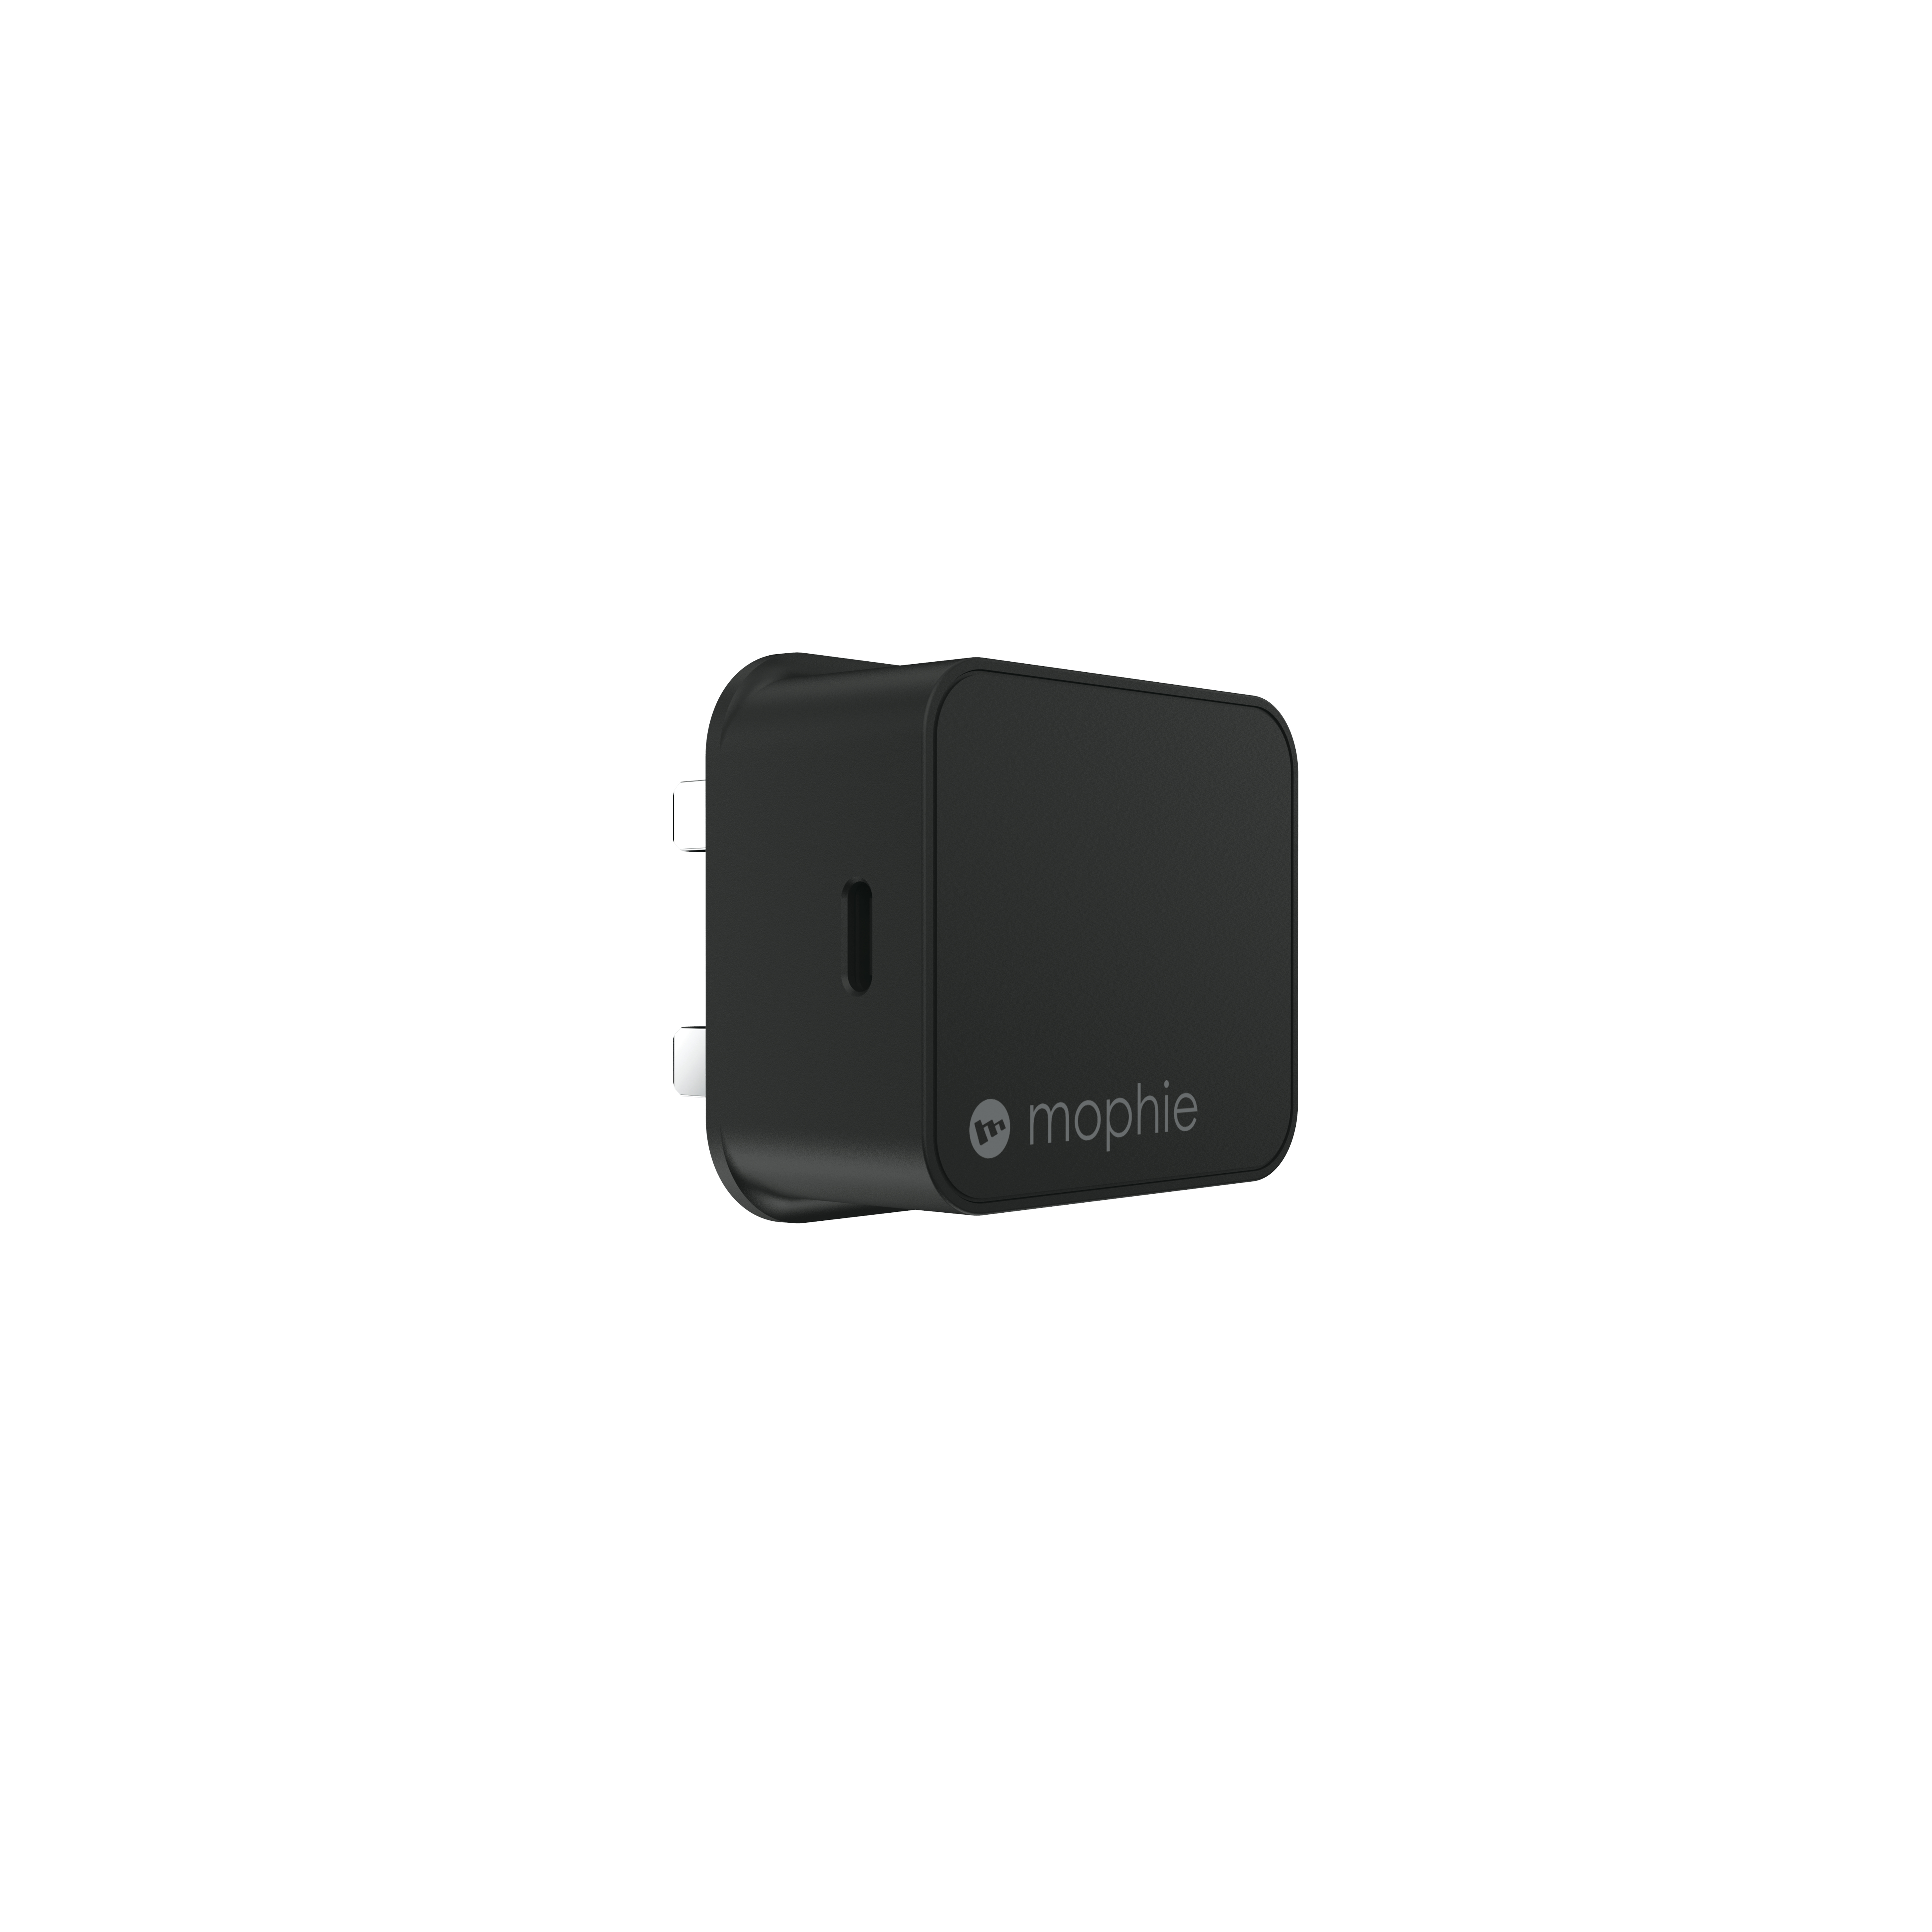 Mophie USB-C 18W Wall Adapter Black